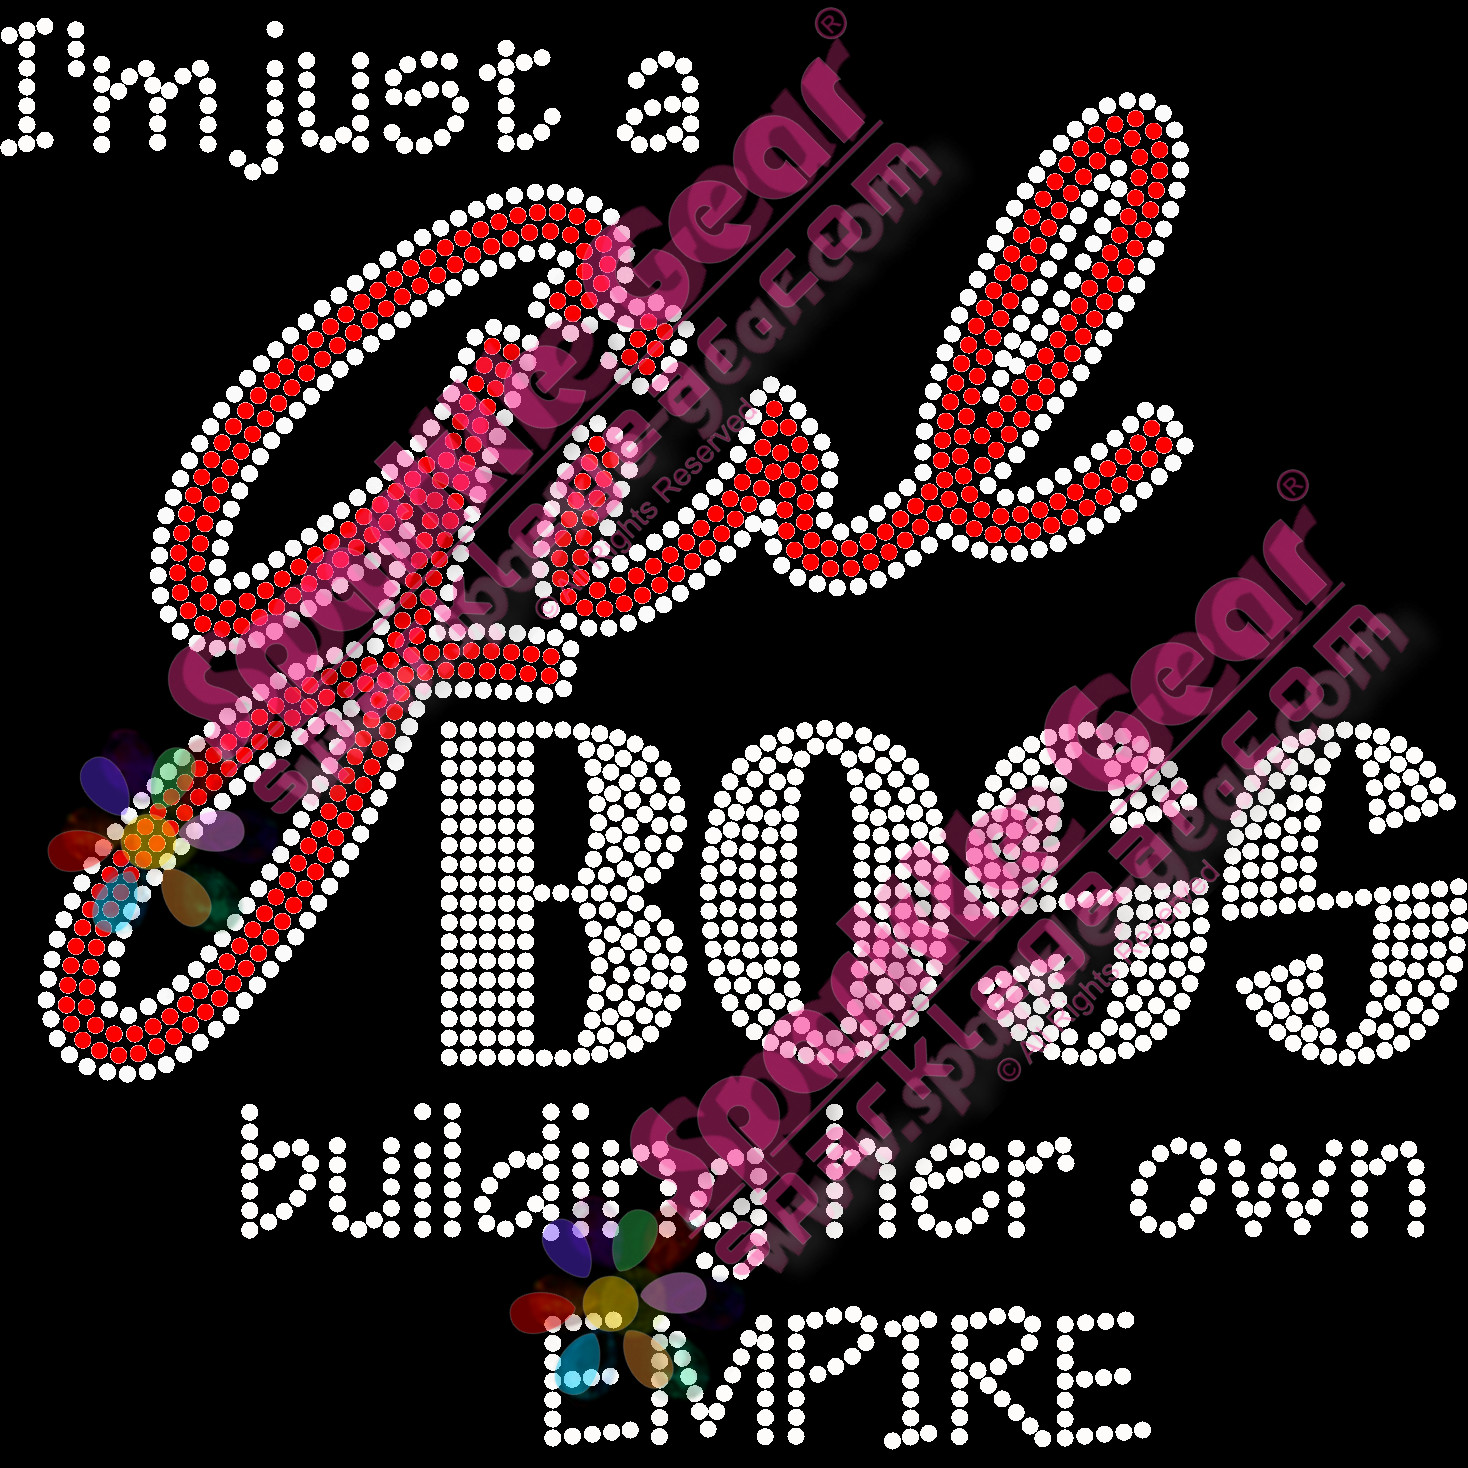 I'm Just a Girl Boss Building Her Own Empire - Sparkle Gear